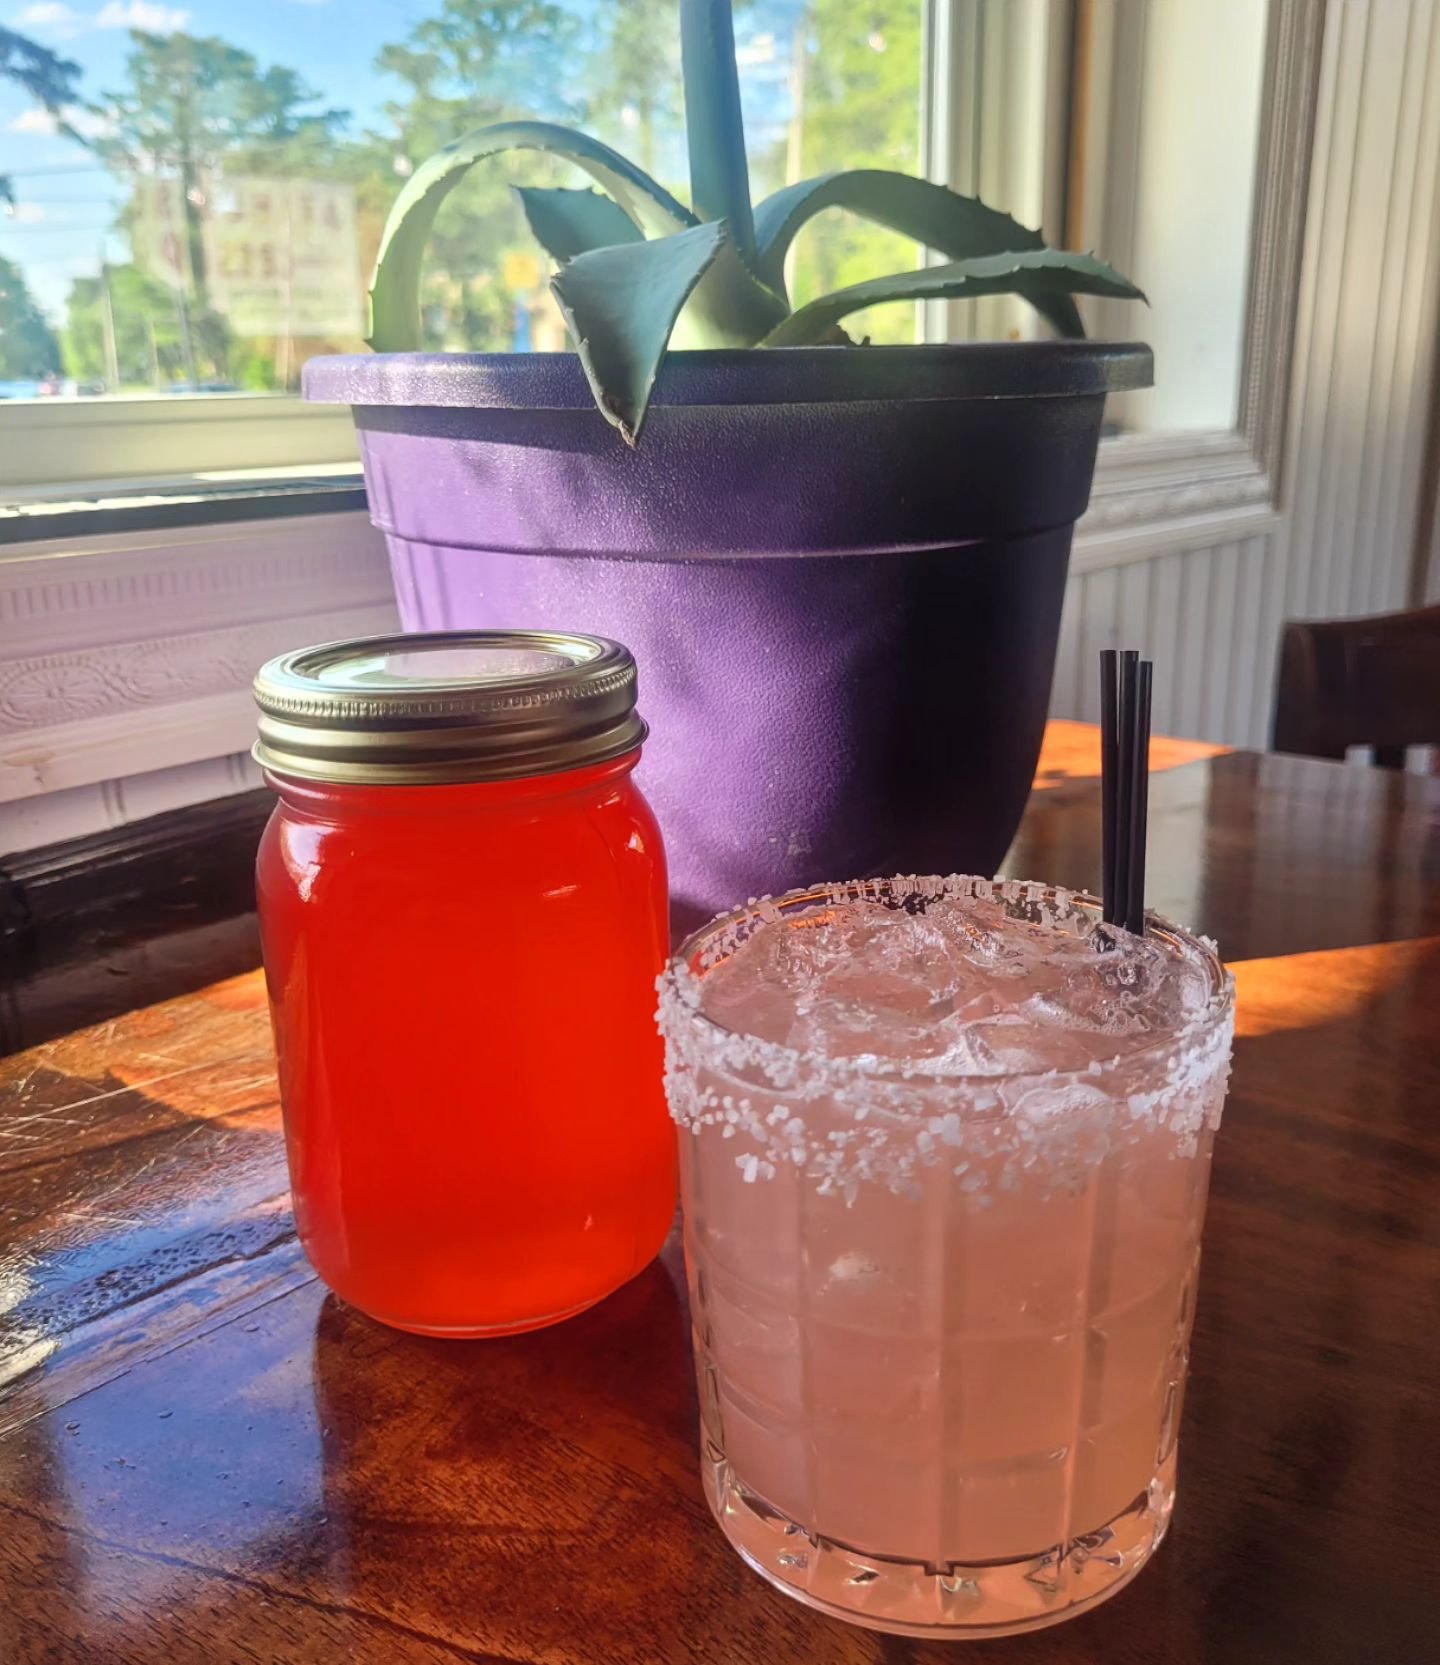 It's a great day to come try our rhubarb margarita! Made with a delicious rhubarb syrup from @gonecoastalcharters and @corazon_tequila 

Open until 10pm!
.
.
.
.
.
.
#greenfieldlakeyachtclub #greenfieldlake #wilmingtonnc #downtownwilmington #downtown